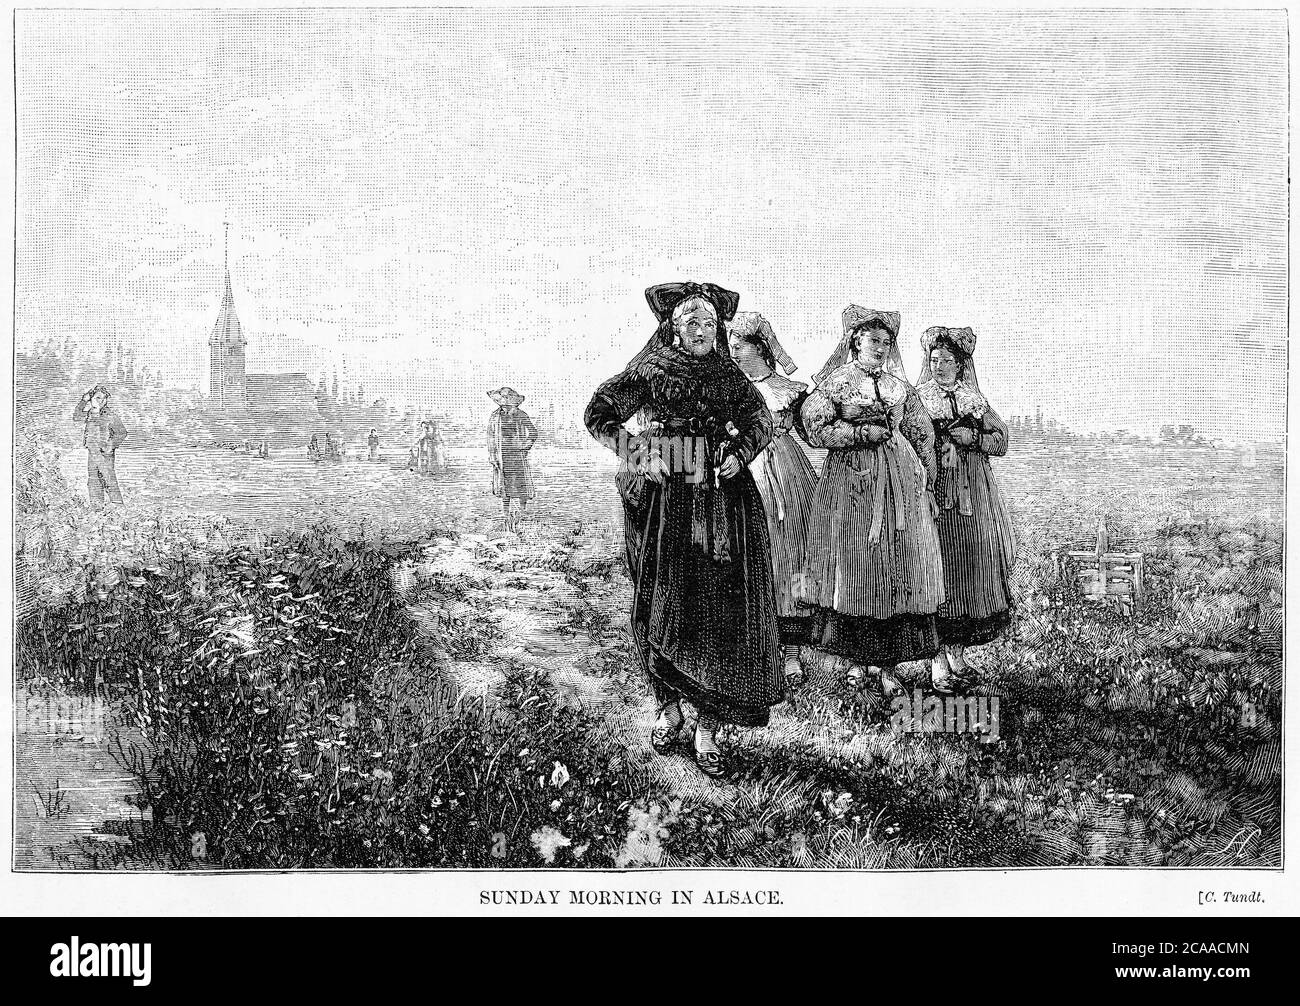 Engraving of a group of women returning from a religious service in Alsace on Sunday morning. Stock Photo